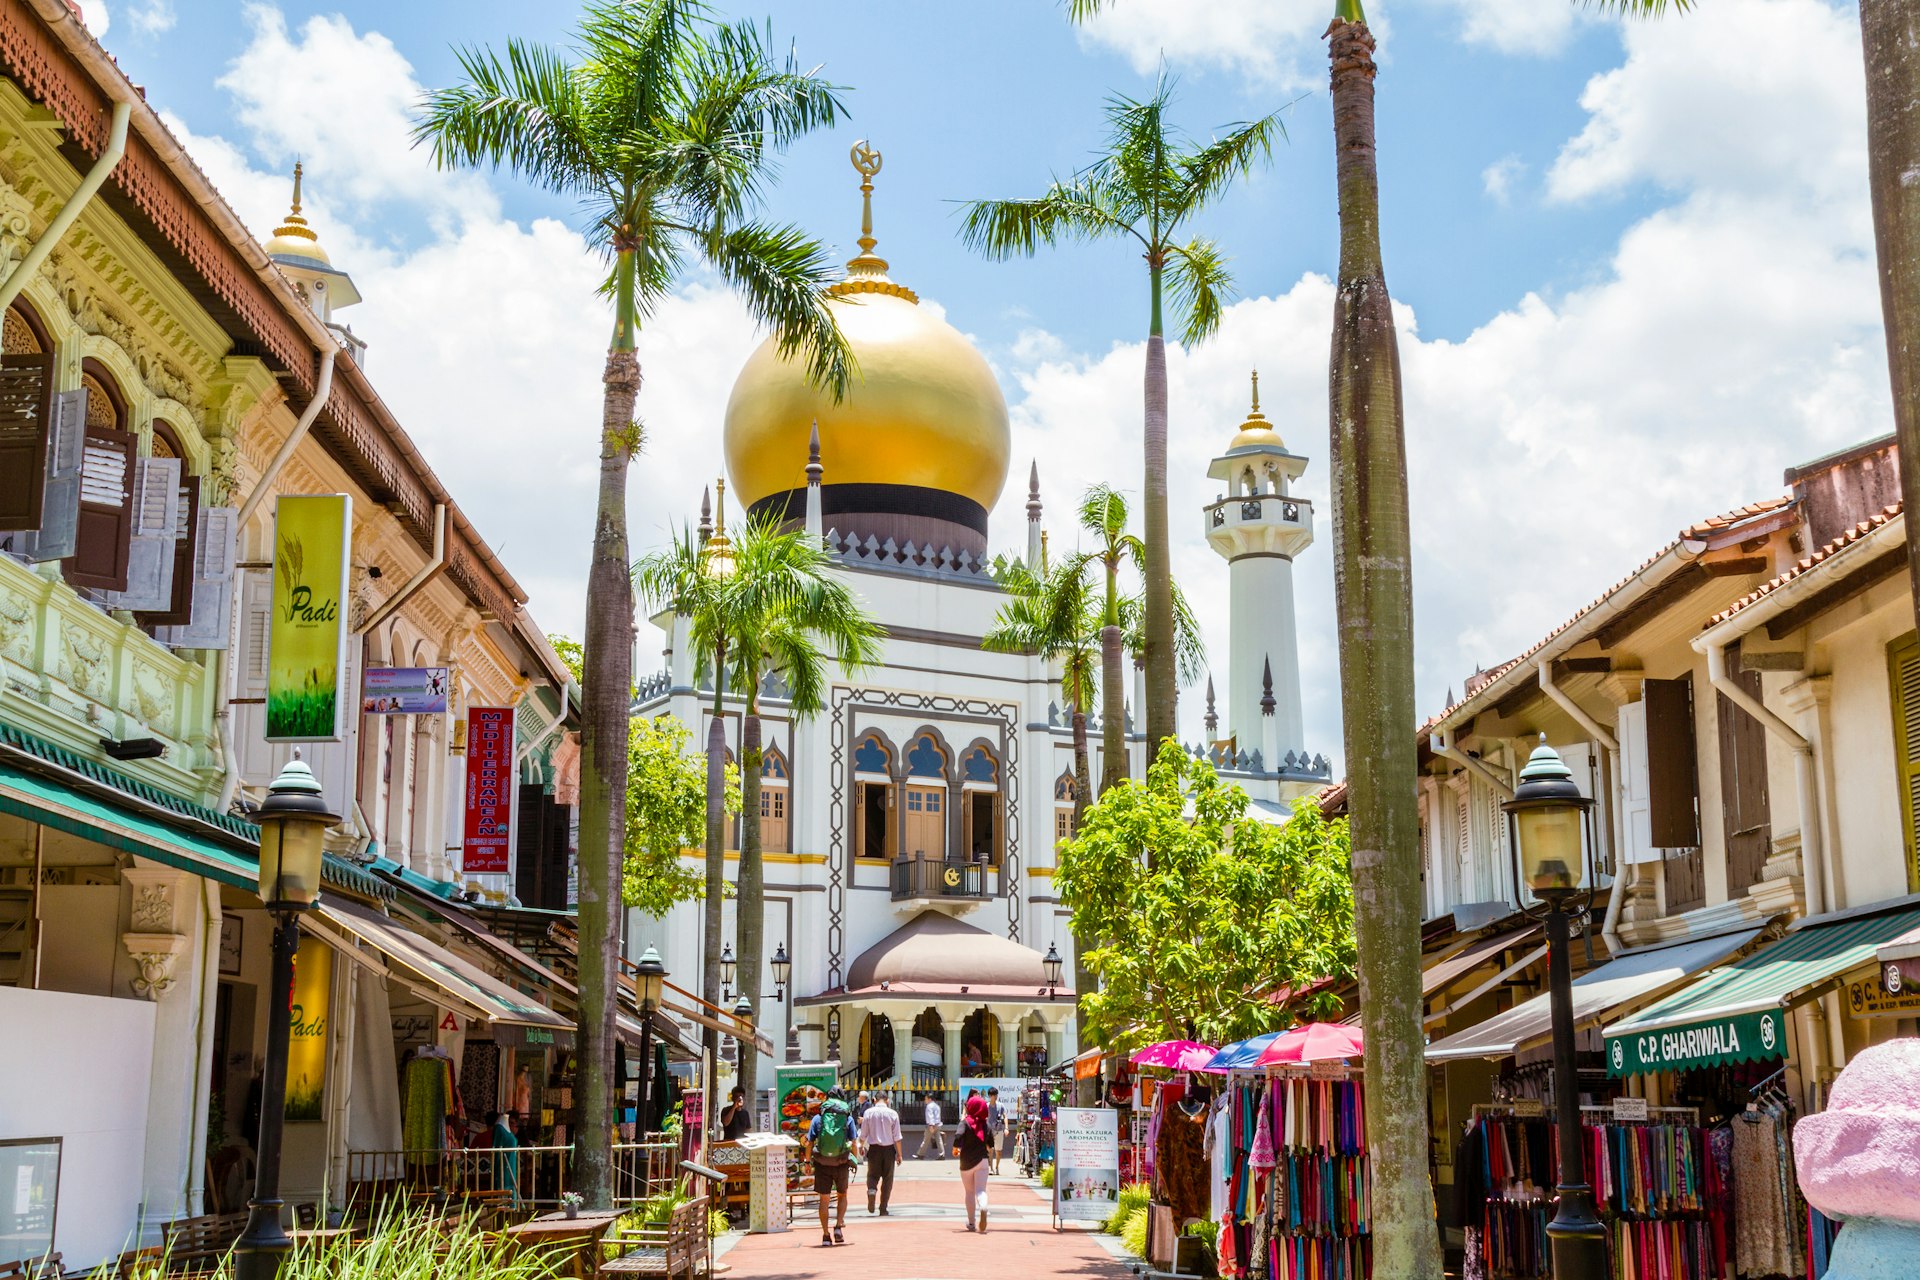 A path lined with palm trees leads to a golden domed mosque